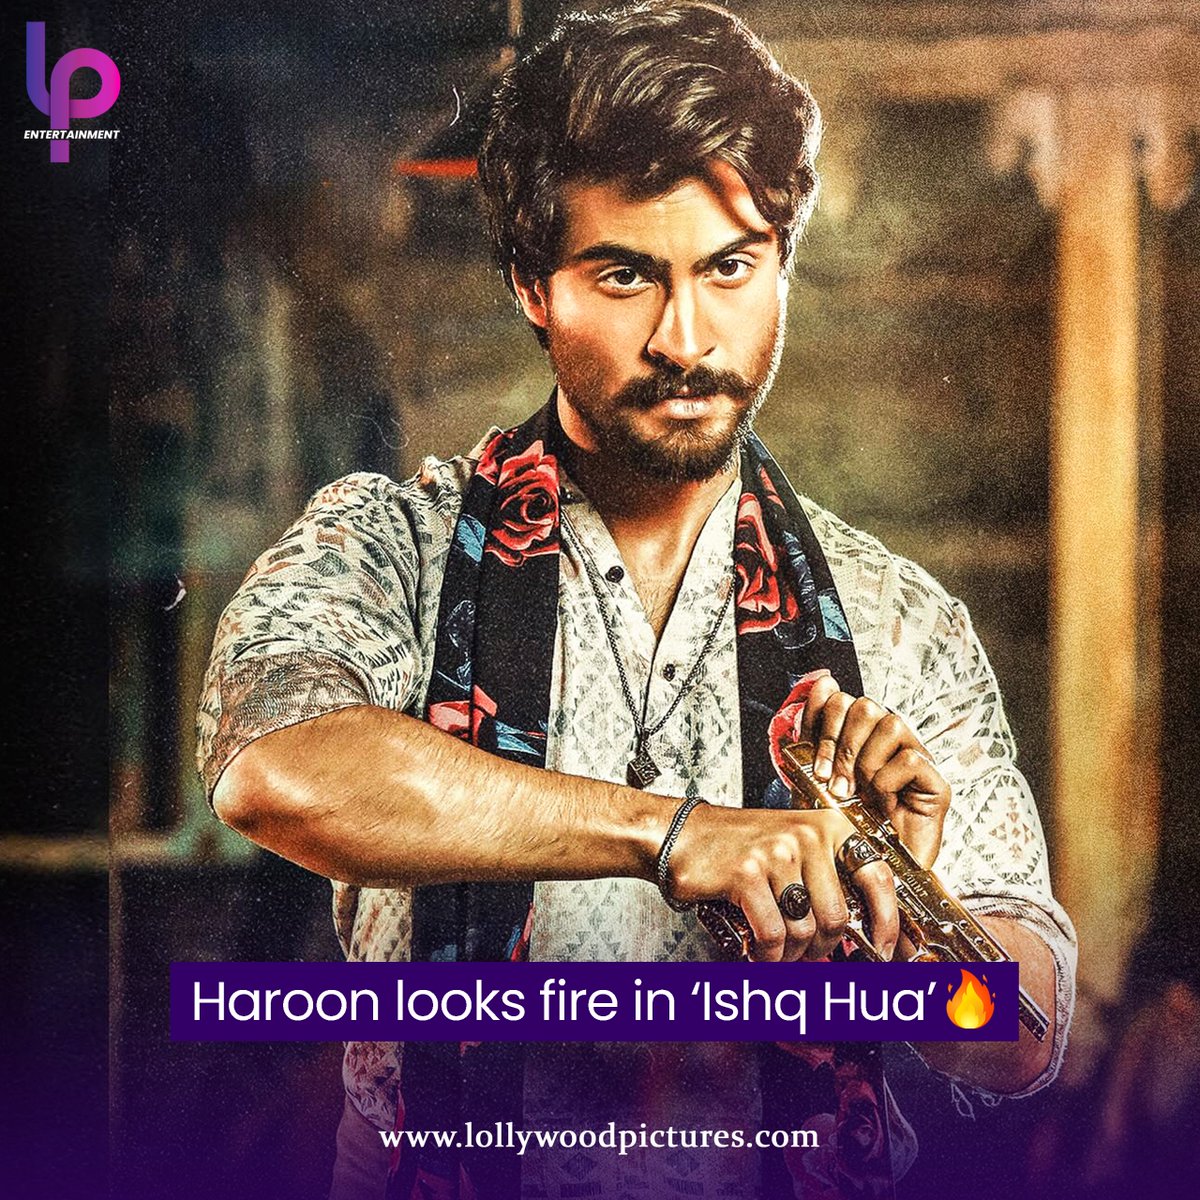 Haroon Kadwani is all set to appear in the upcoming drama serial 'Ishq Hua,' and his strong and Macho look has already piqued our interest. 🔥🙌

#HaroonKadwani #KomalMeer #IshqHua #HarPalGeo #UpcomingDrama #7thSkyEntertainment #LPEntertainment